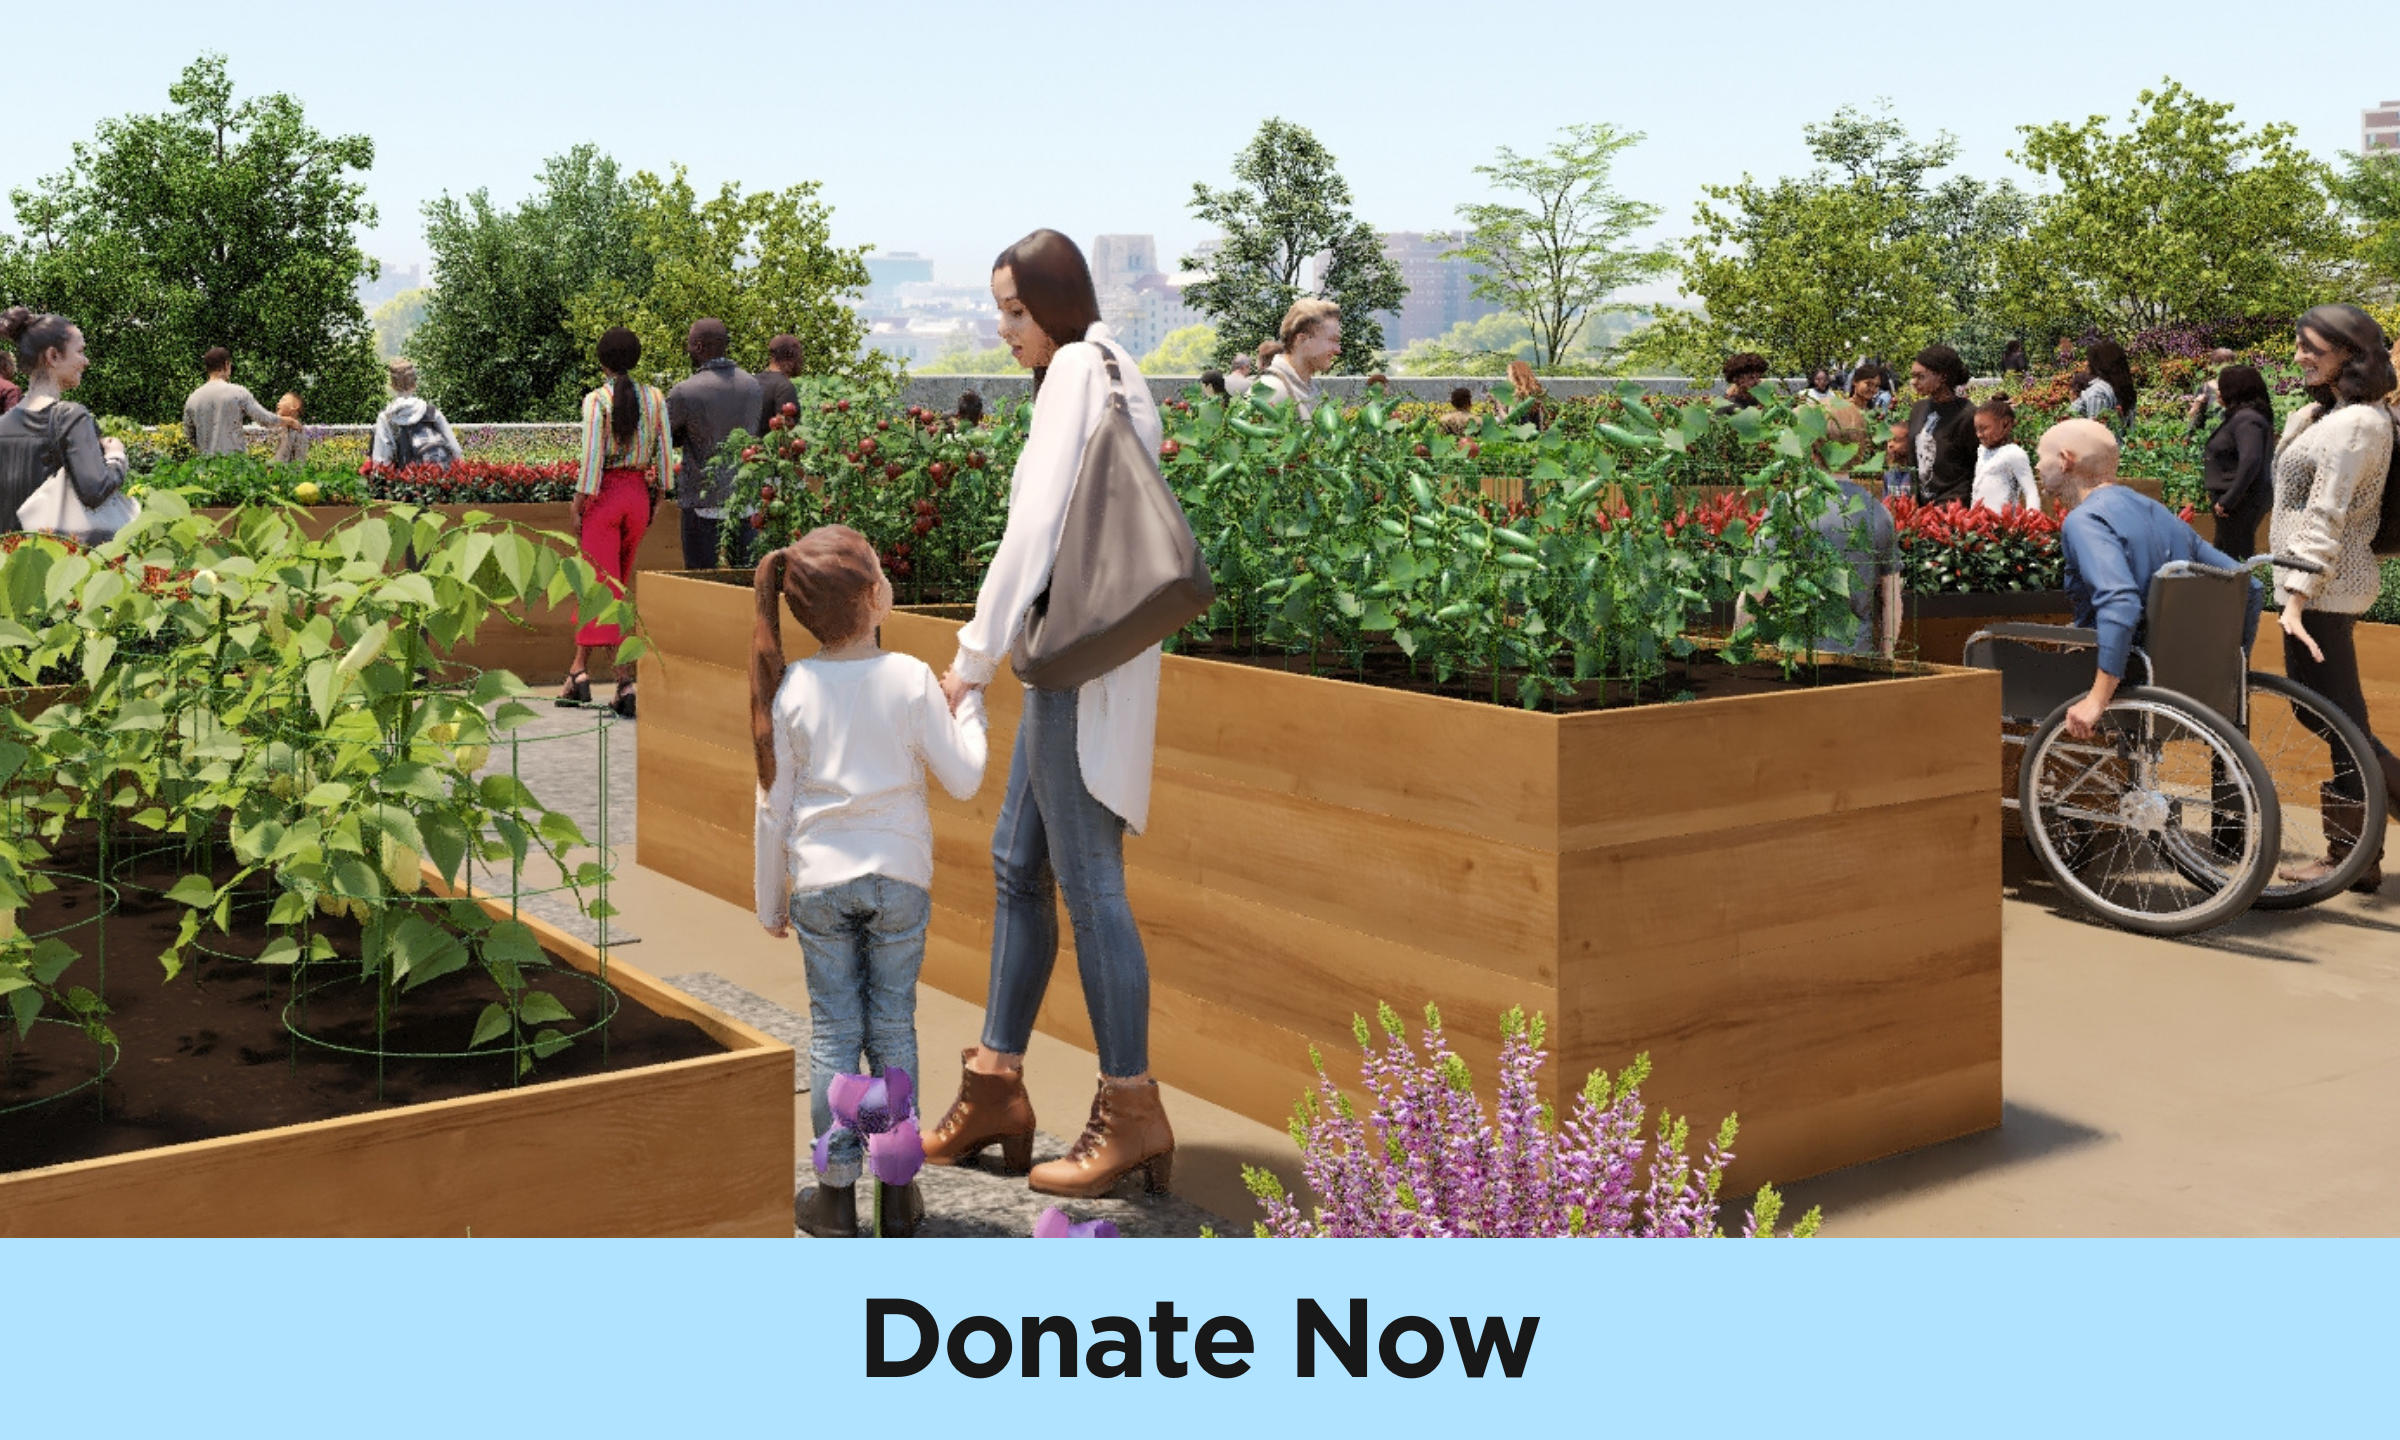 A rending of the future gardens at the Obama Presidential Center. Various groups of people walking around enjoying the beautiful luscious green and colorful plants. The words "Donate Now" appear at the bottom of the image linking to the donation options to support the OPC.